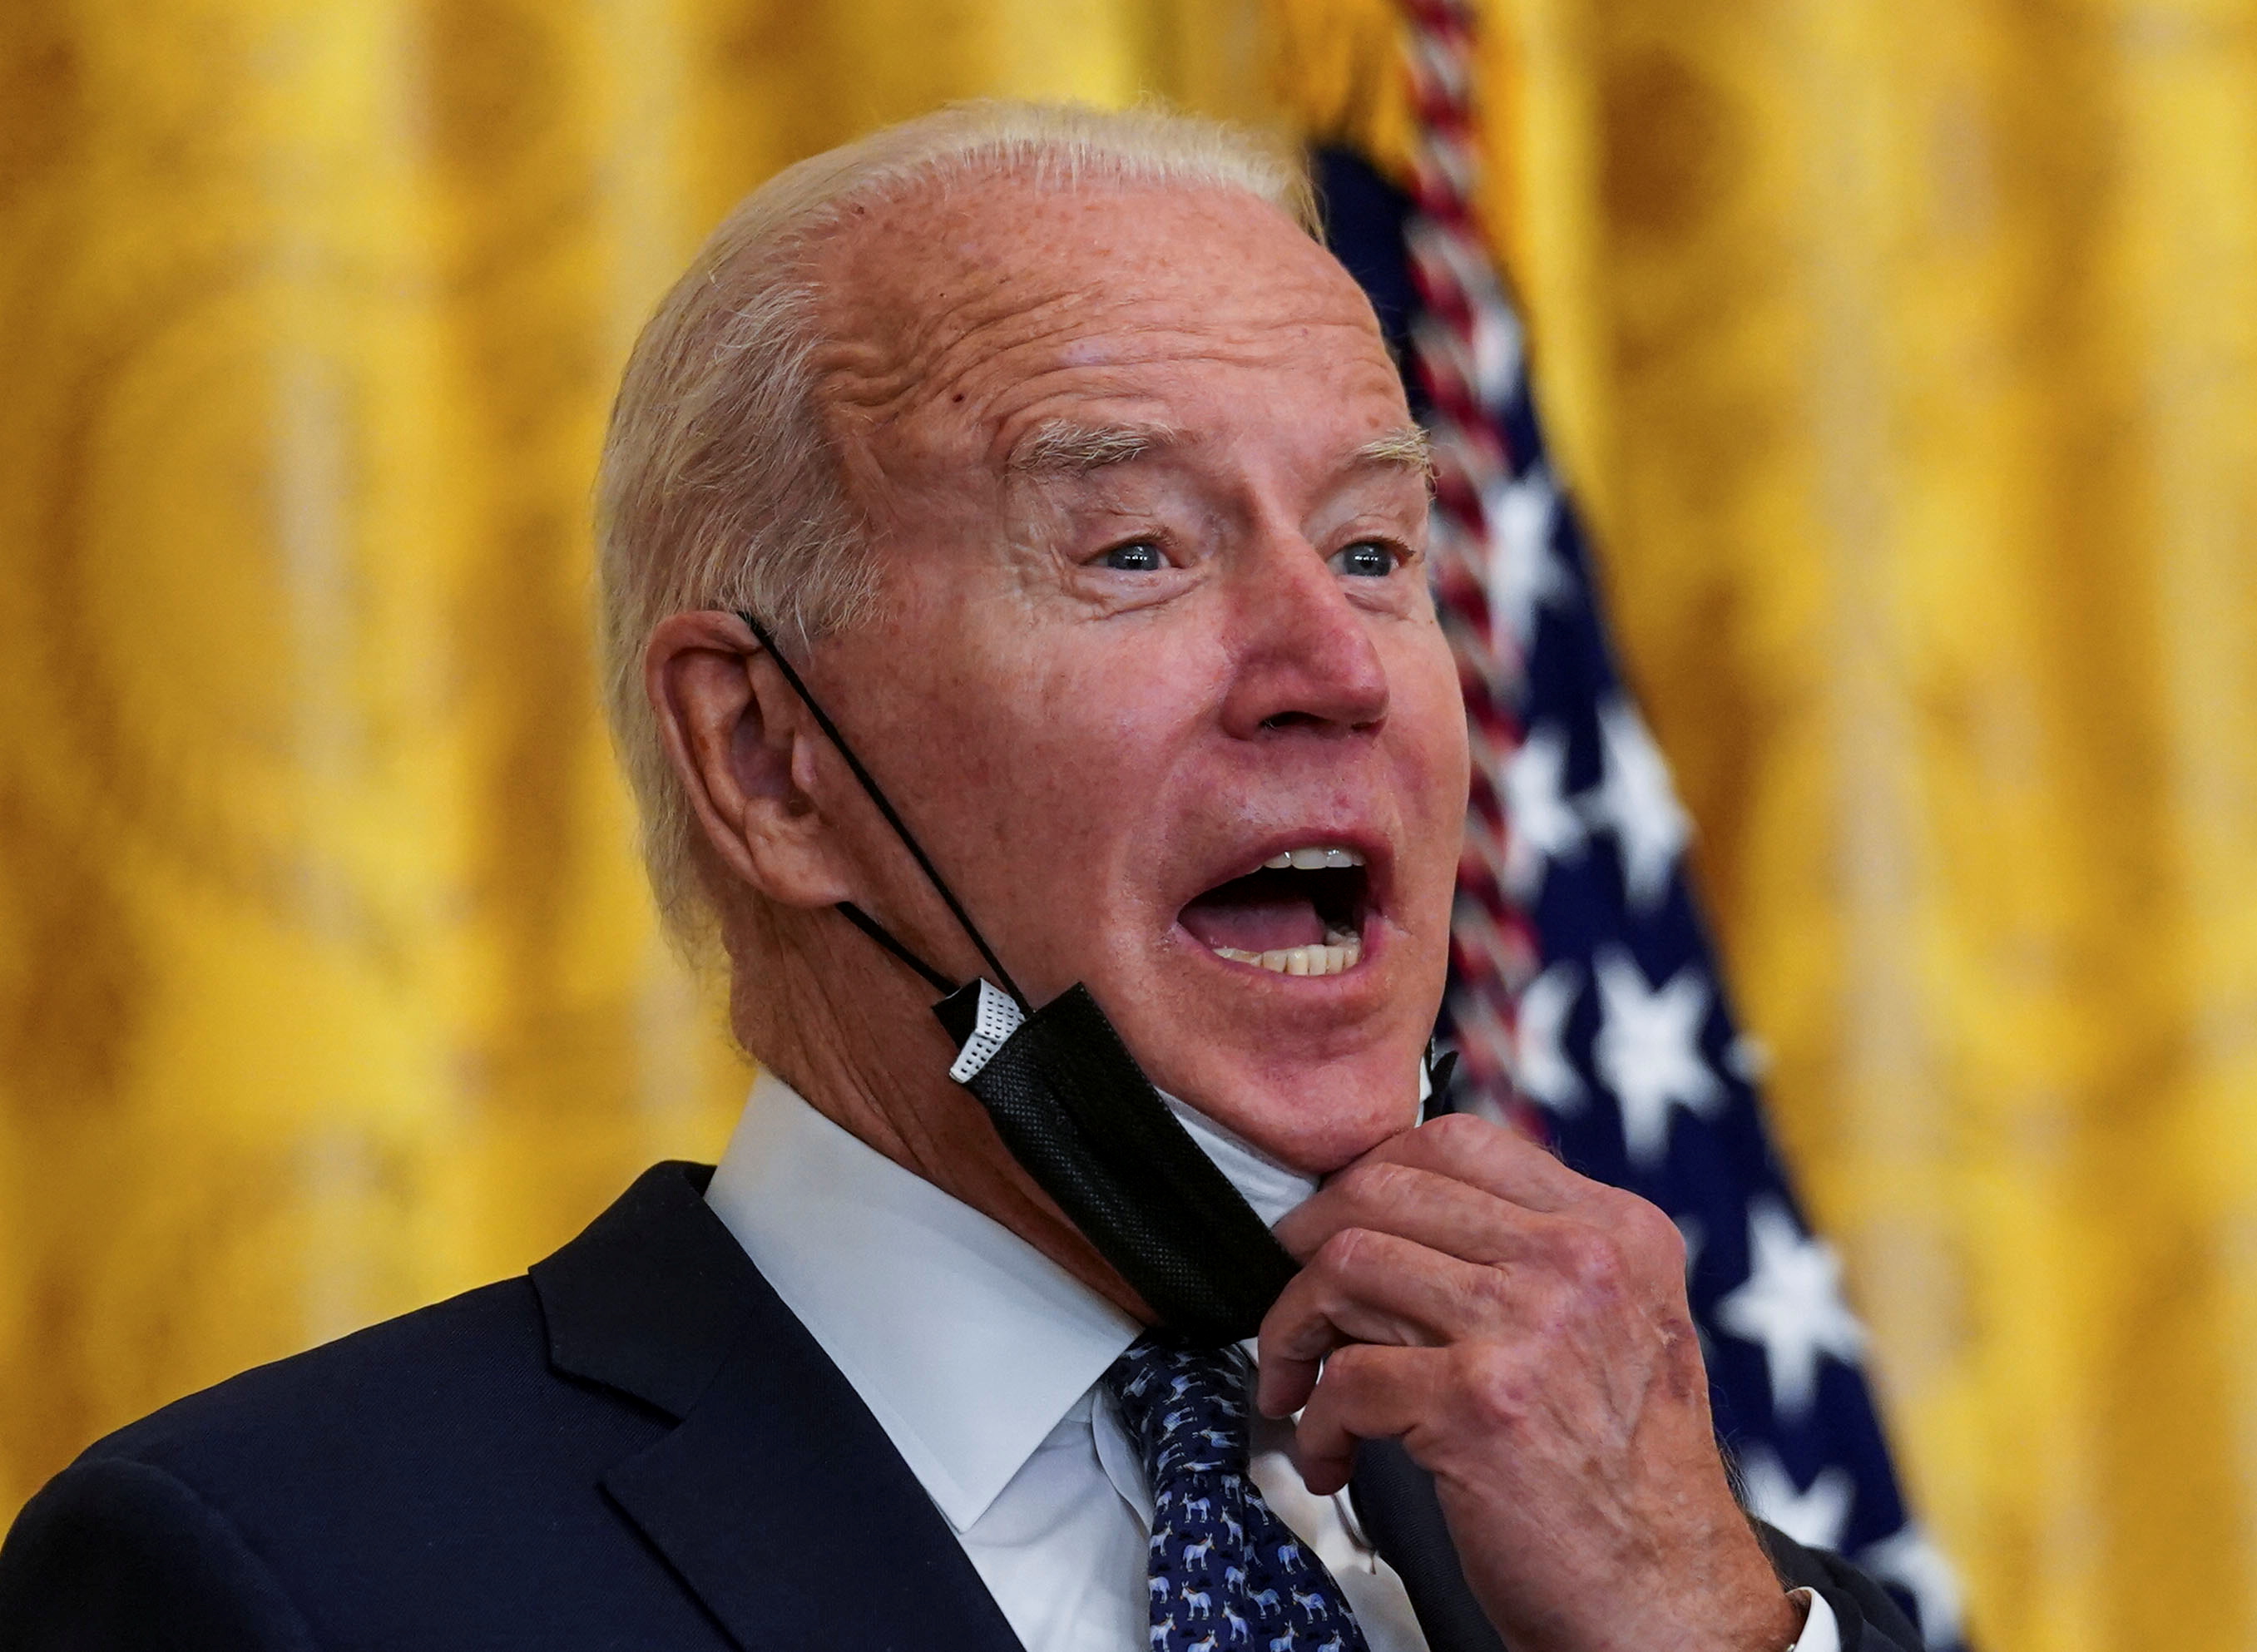 U.S. President Biden speaks about labor unions at the White House in Washington